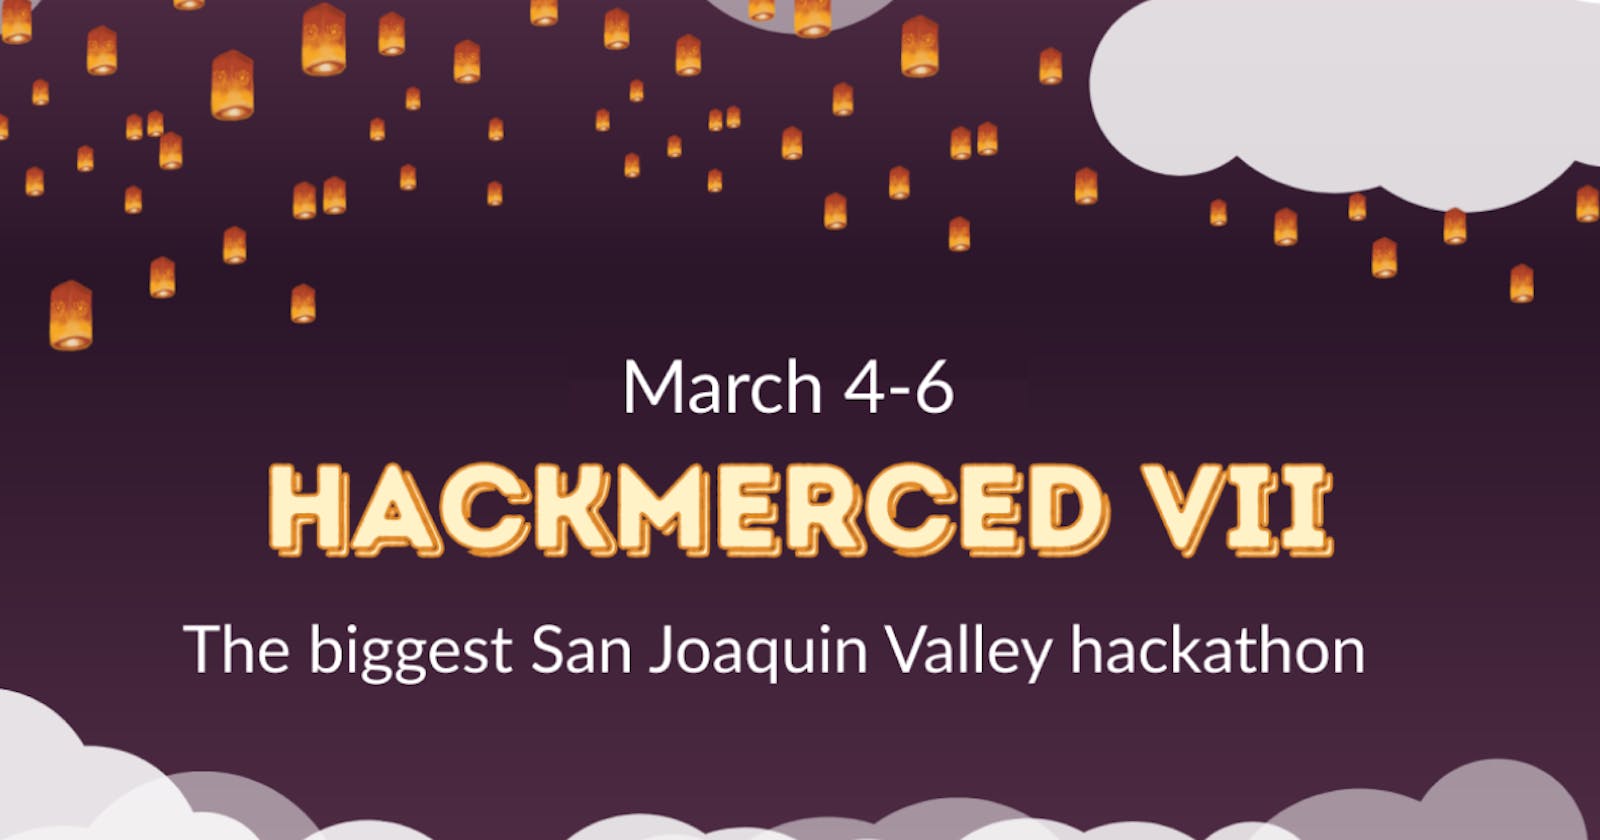 Supporting Student Innovation at HackMerced VII